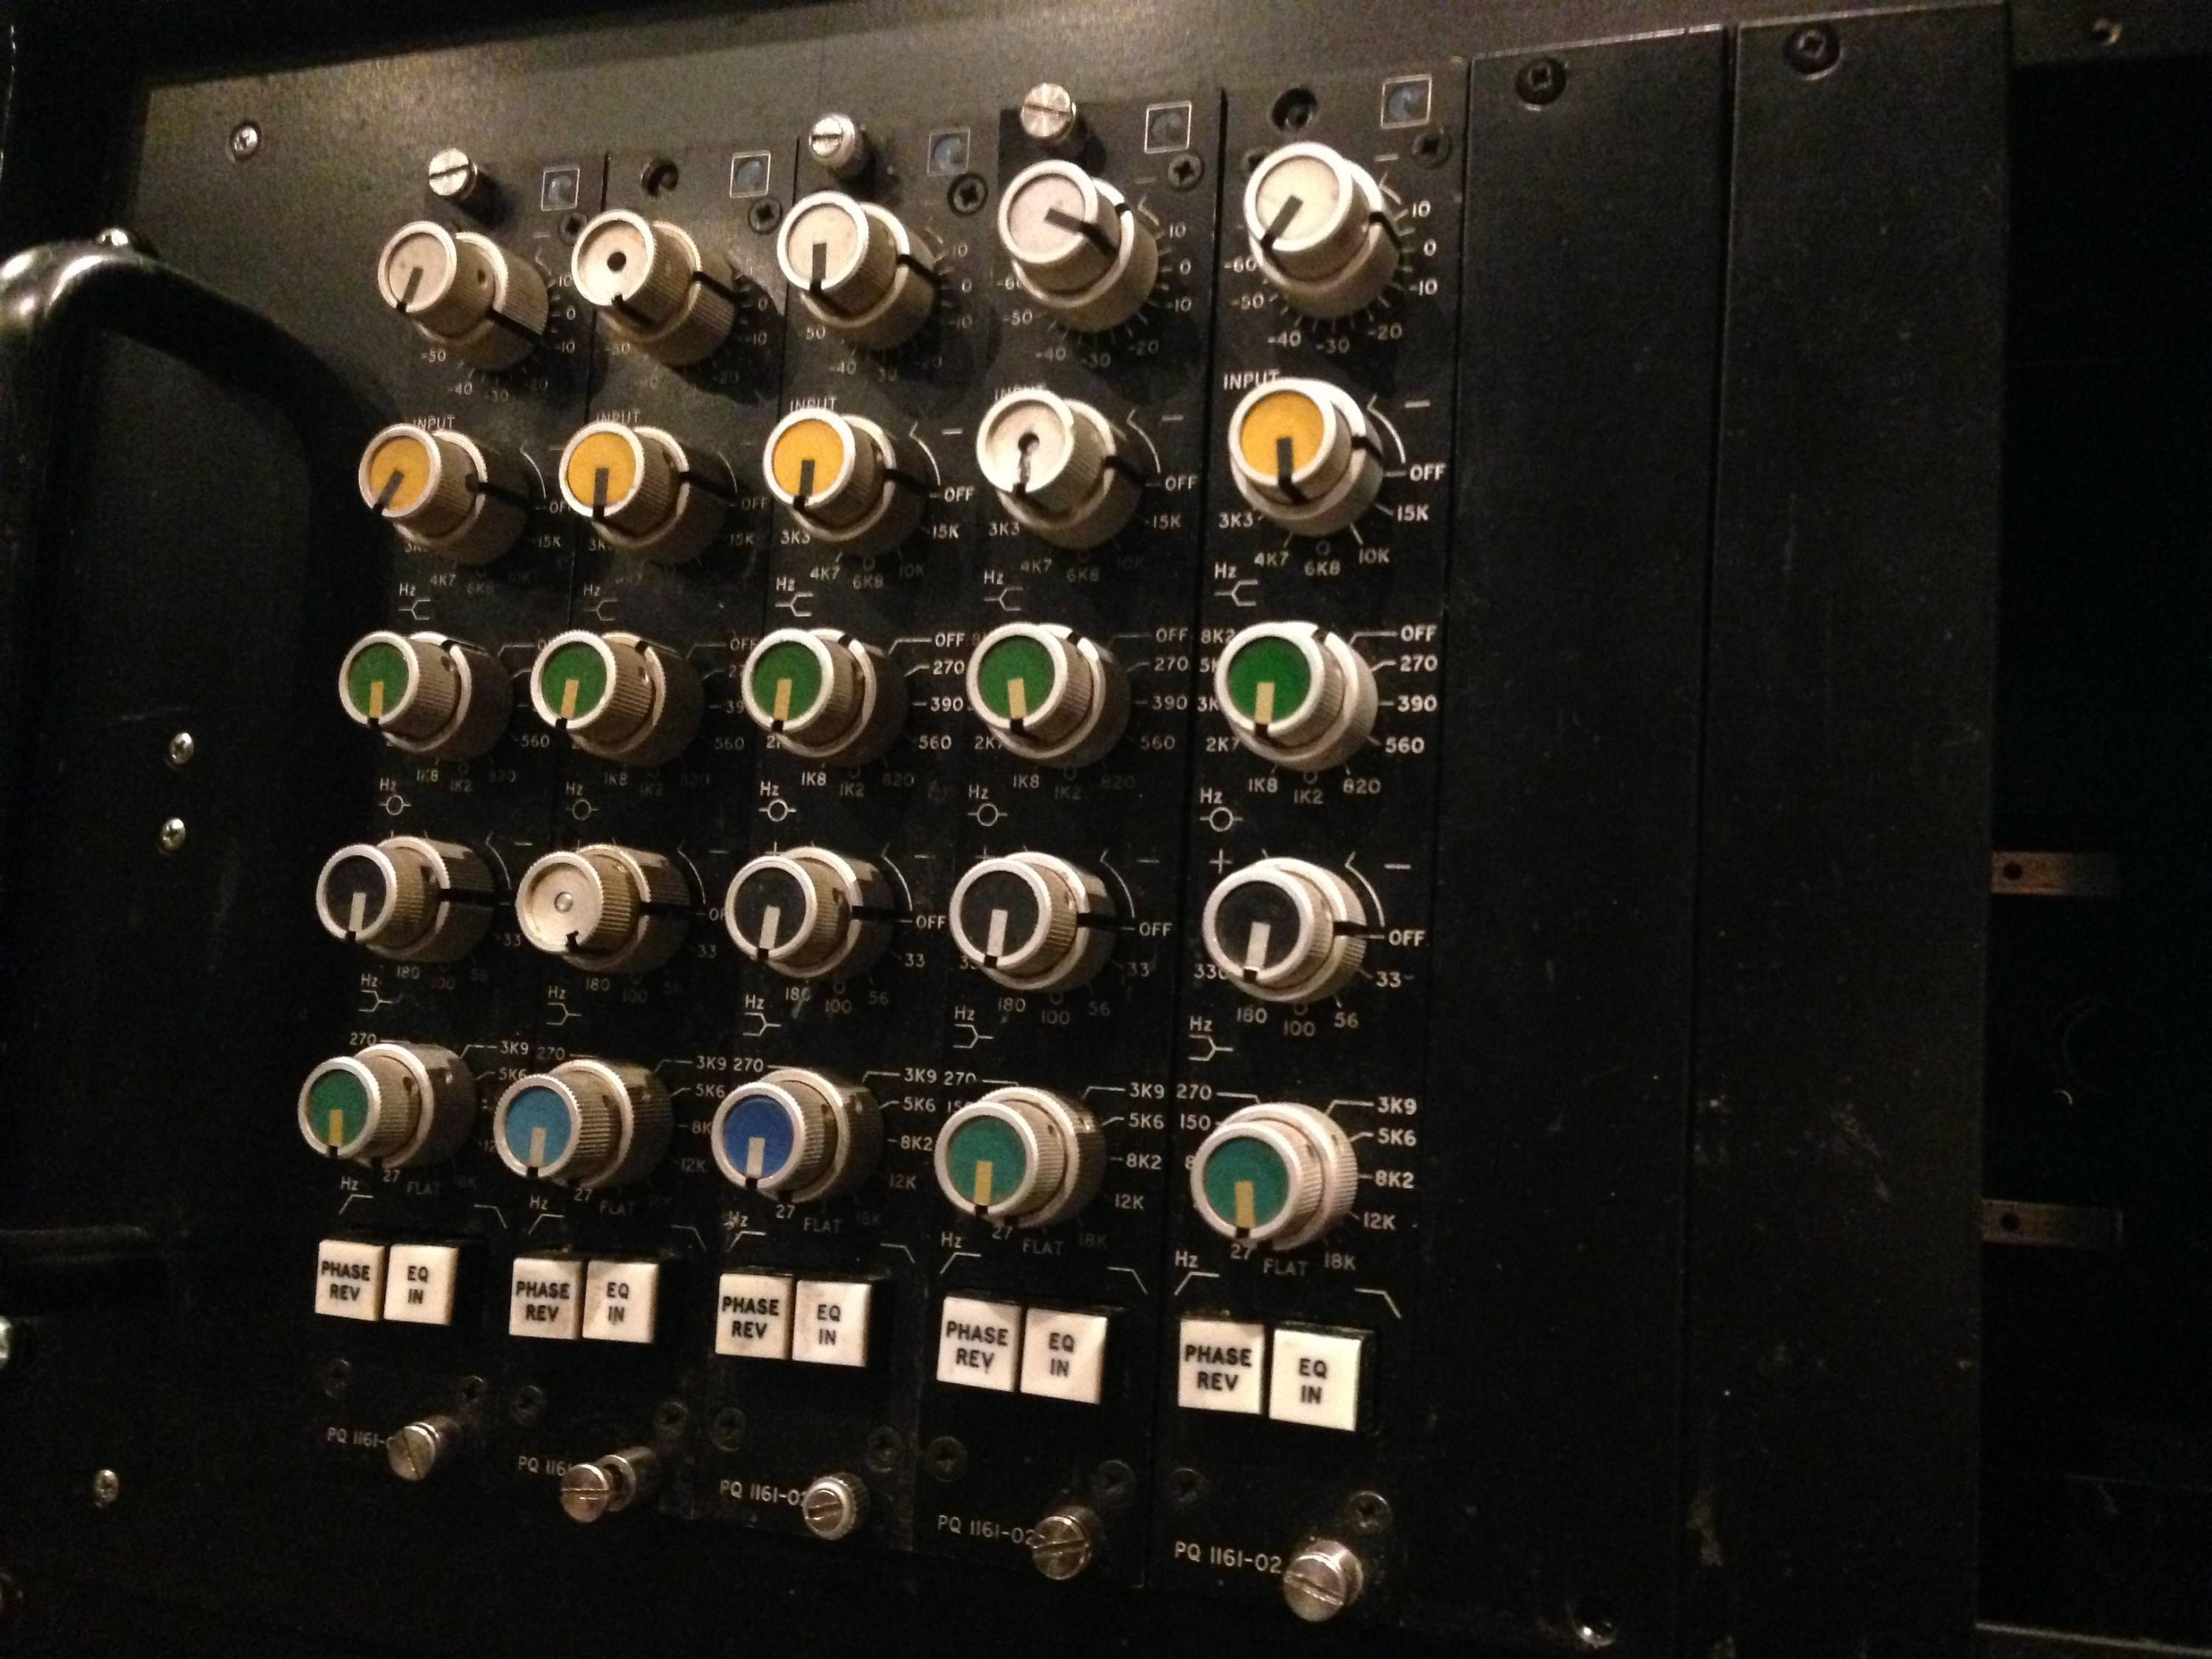 5 Calrec PQ 1161-02 mic preamps and EQs.